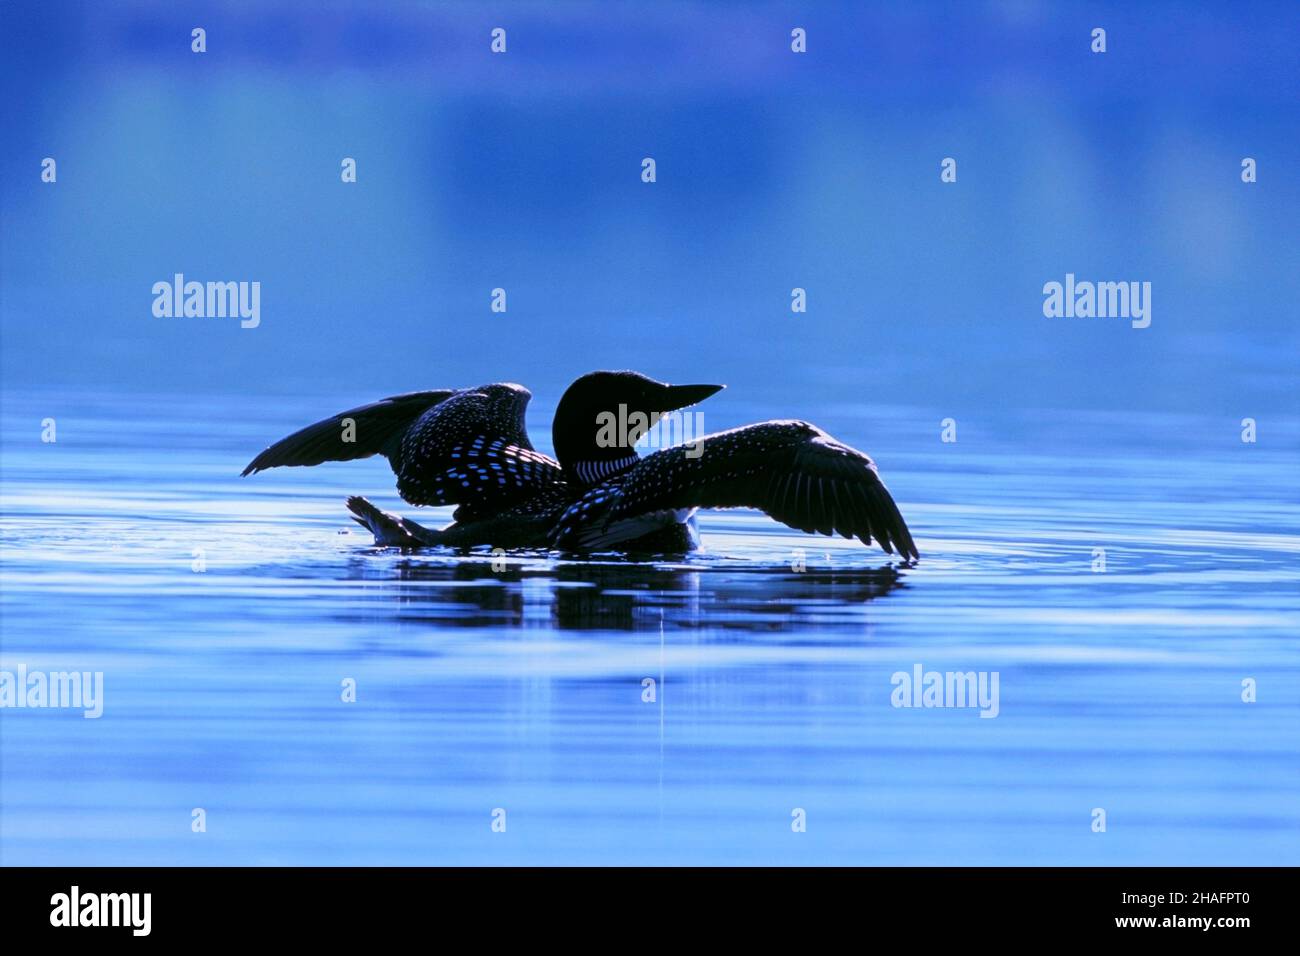 Common Loon or Great Northern Diver in calm blue lake, wings spread, backlight. Stock Photo